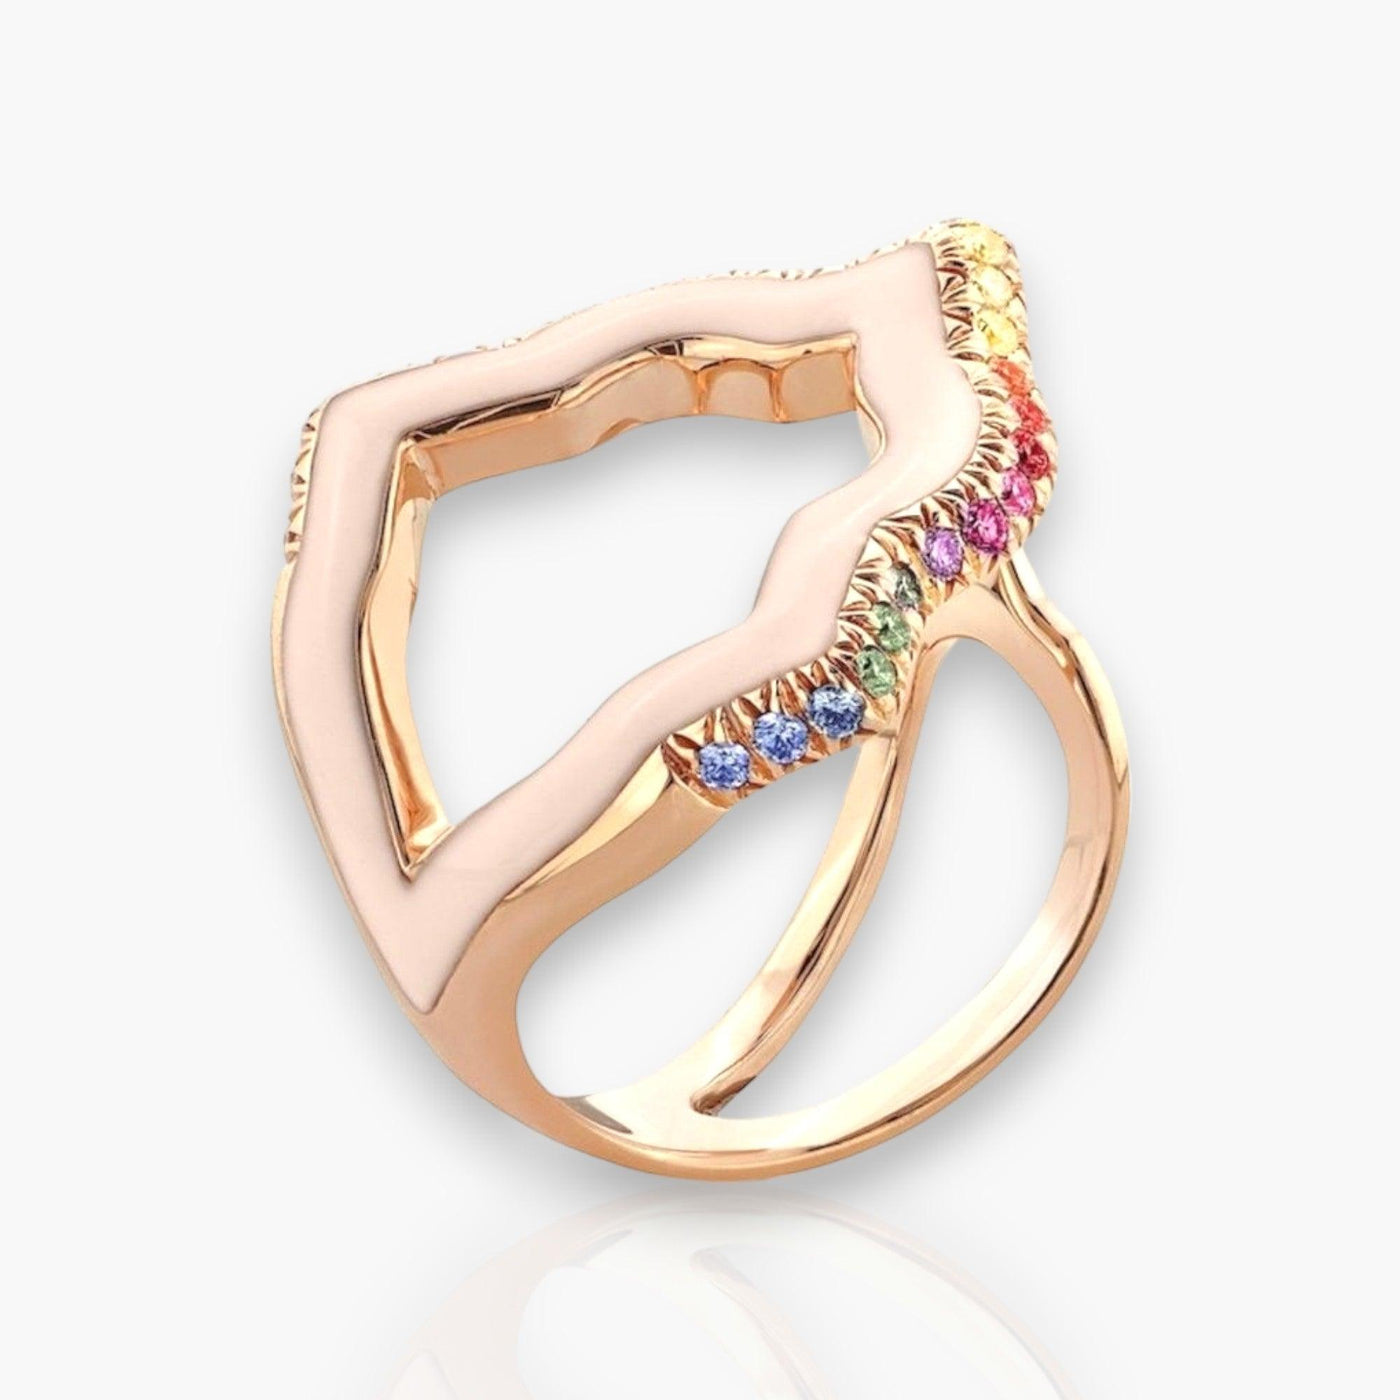 Anime Rock Ring, Rose Gold, Dusty Pink And Multicolor Sapphire - Moregola Fine Jewelry